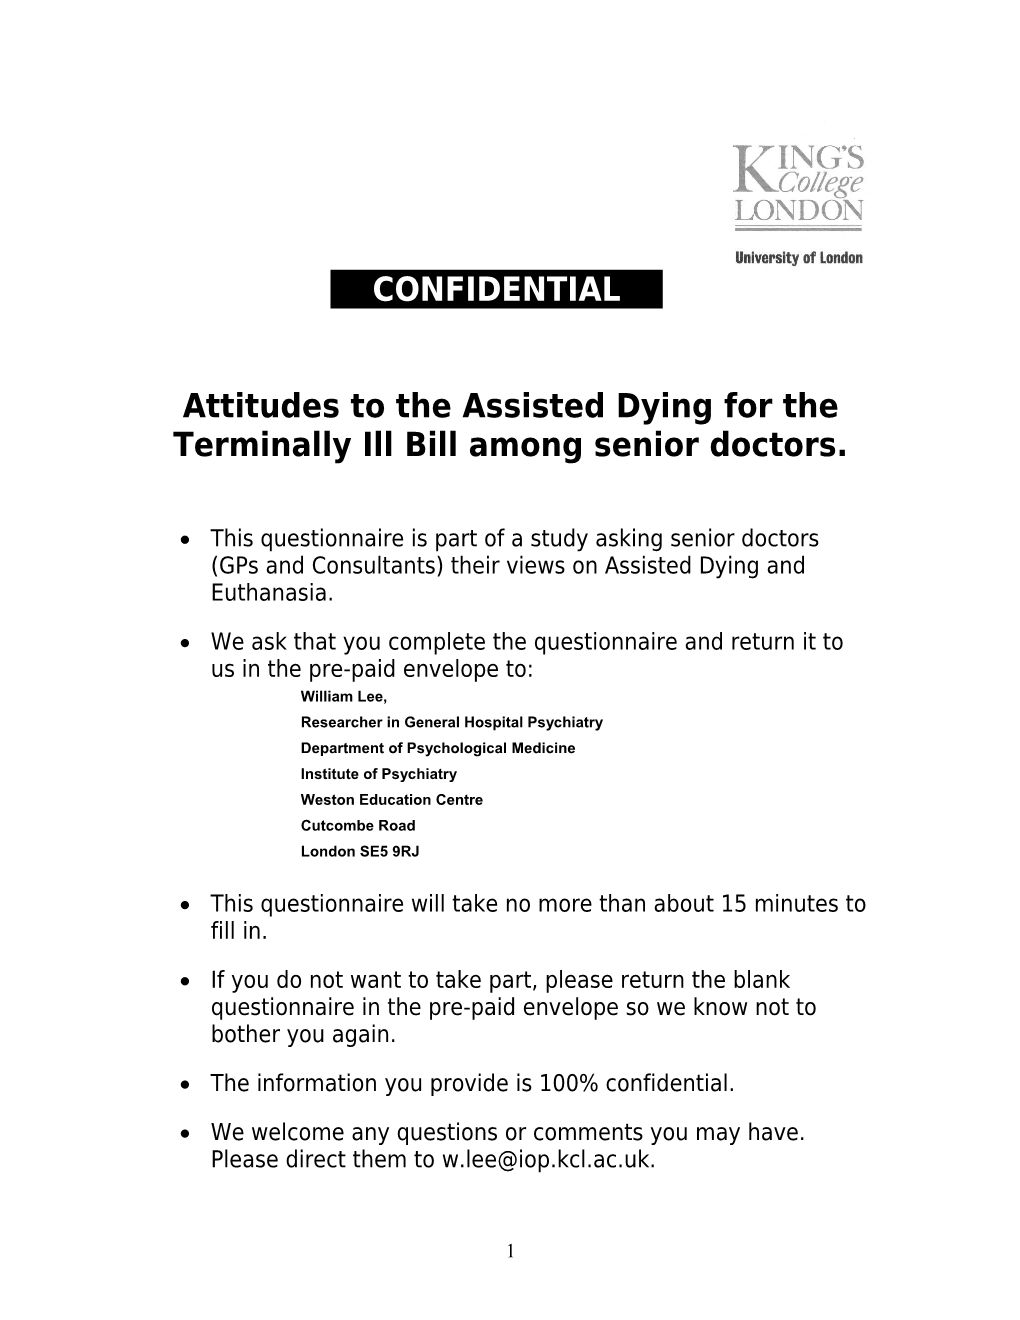 Attitudes to the Assisted Dying Bill Among Physicians in England and Wales